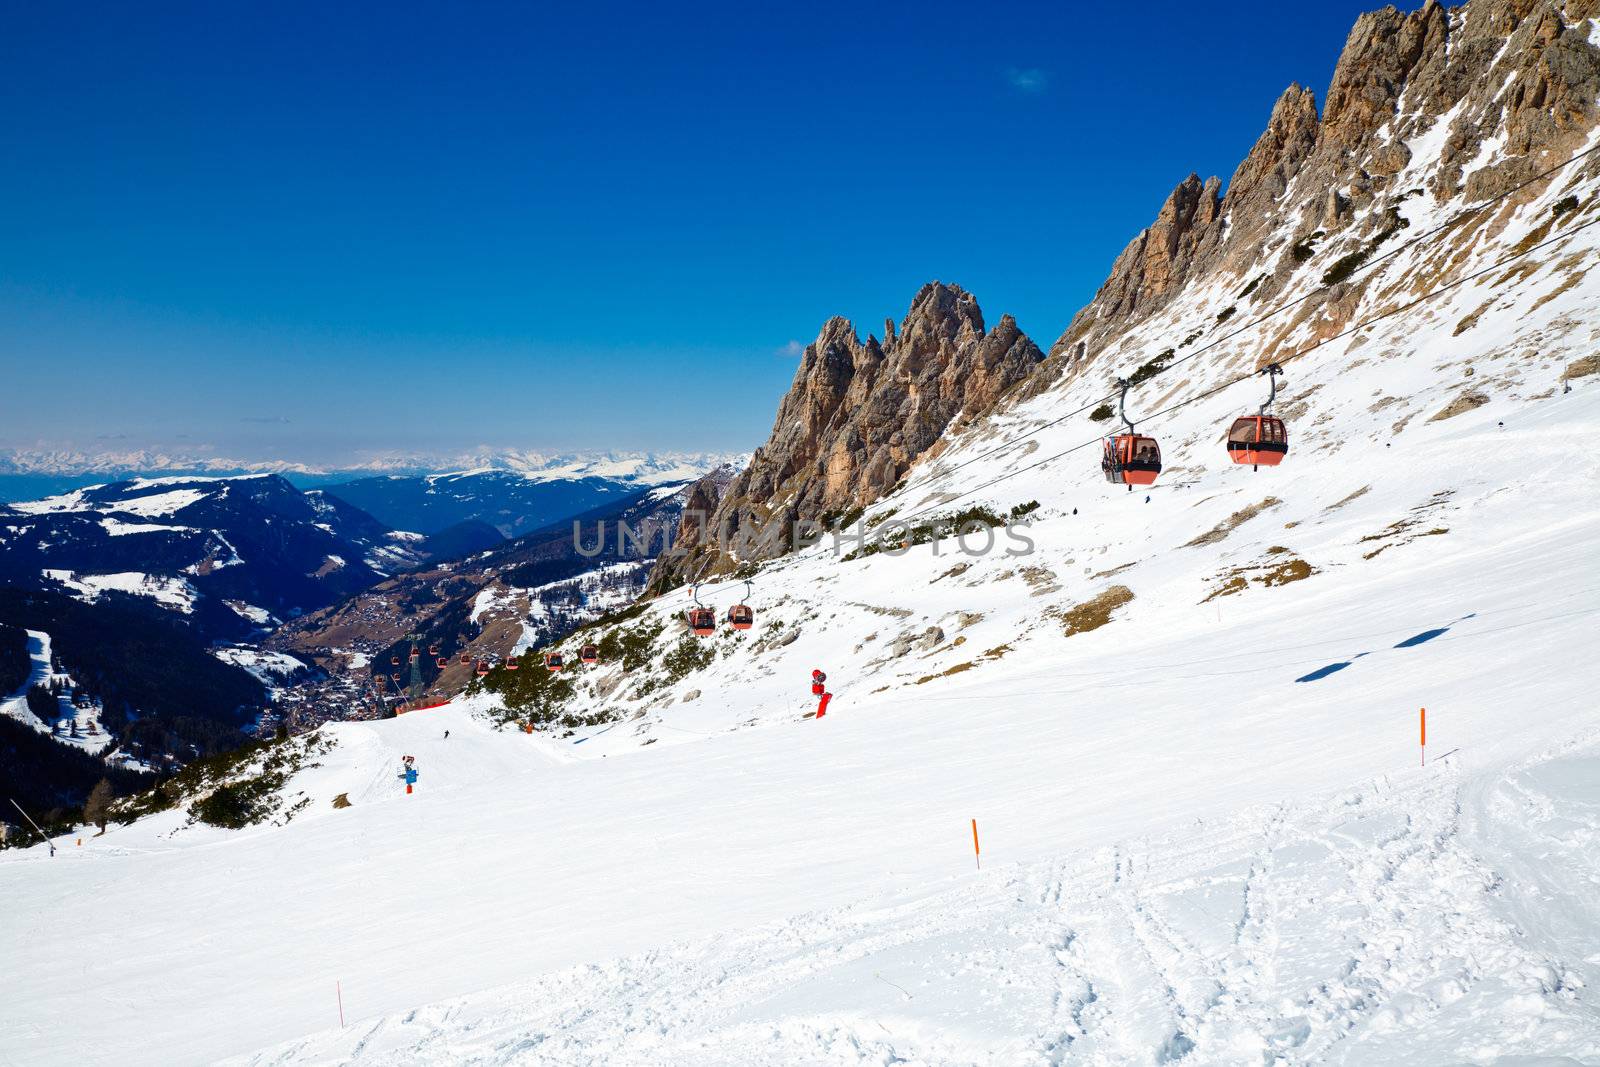 View of a ski resort area in Italy